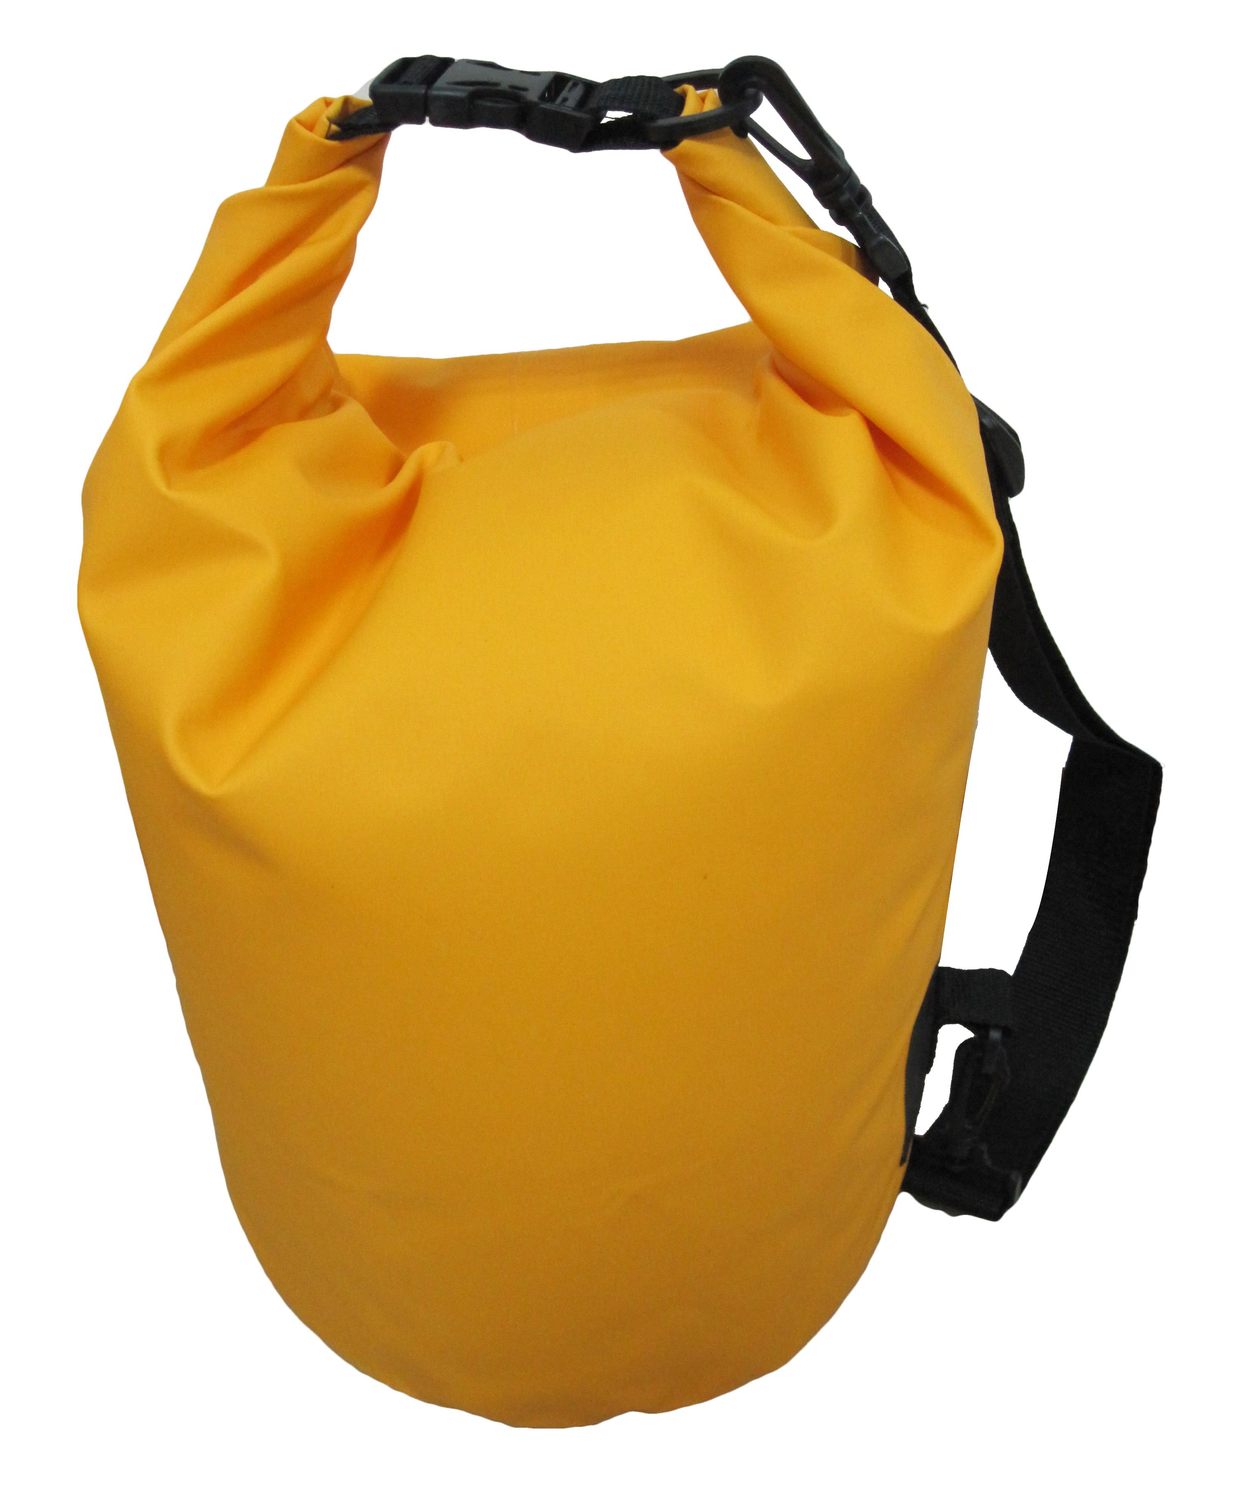 PERFECT IMAGE Perfect Image Waterproof Dry Bags - 10L, 20L or 30L